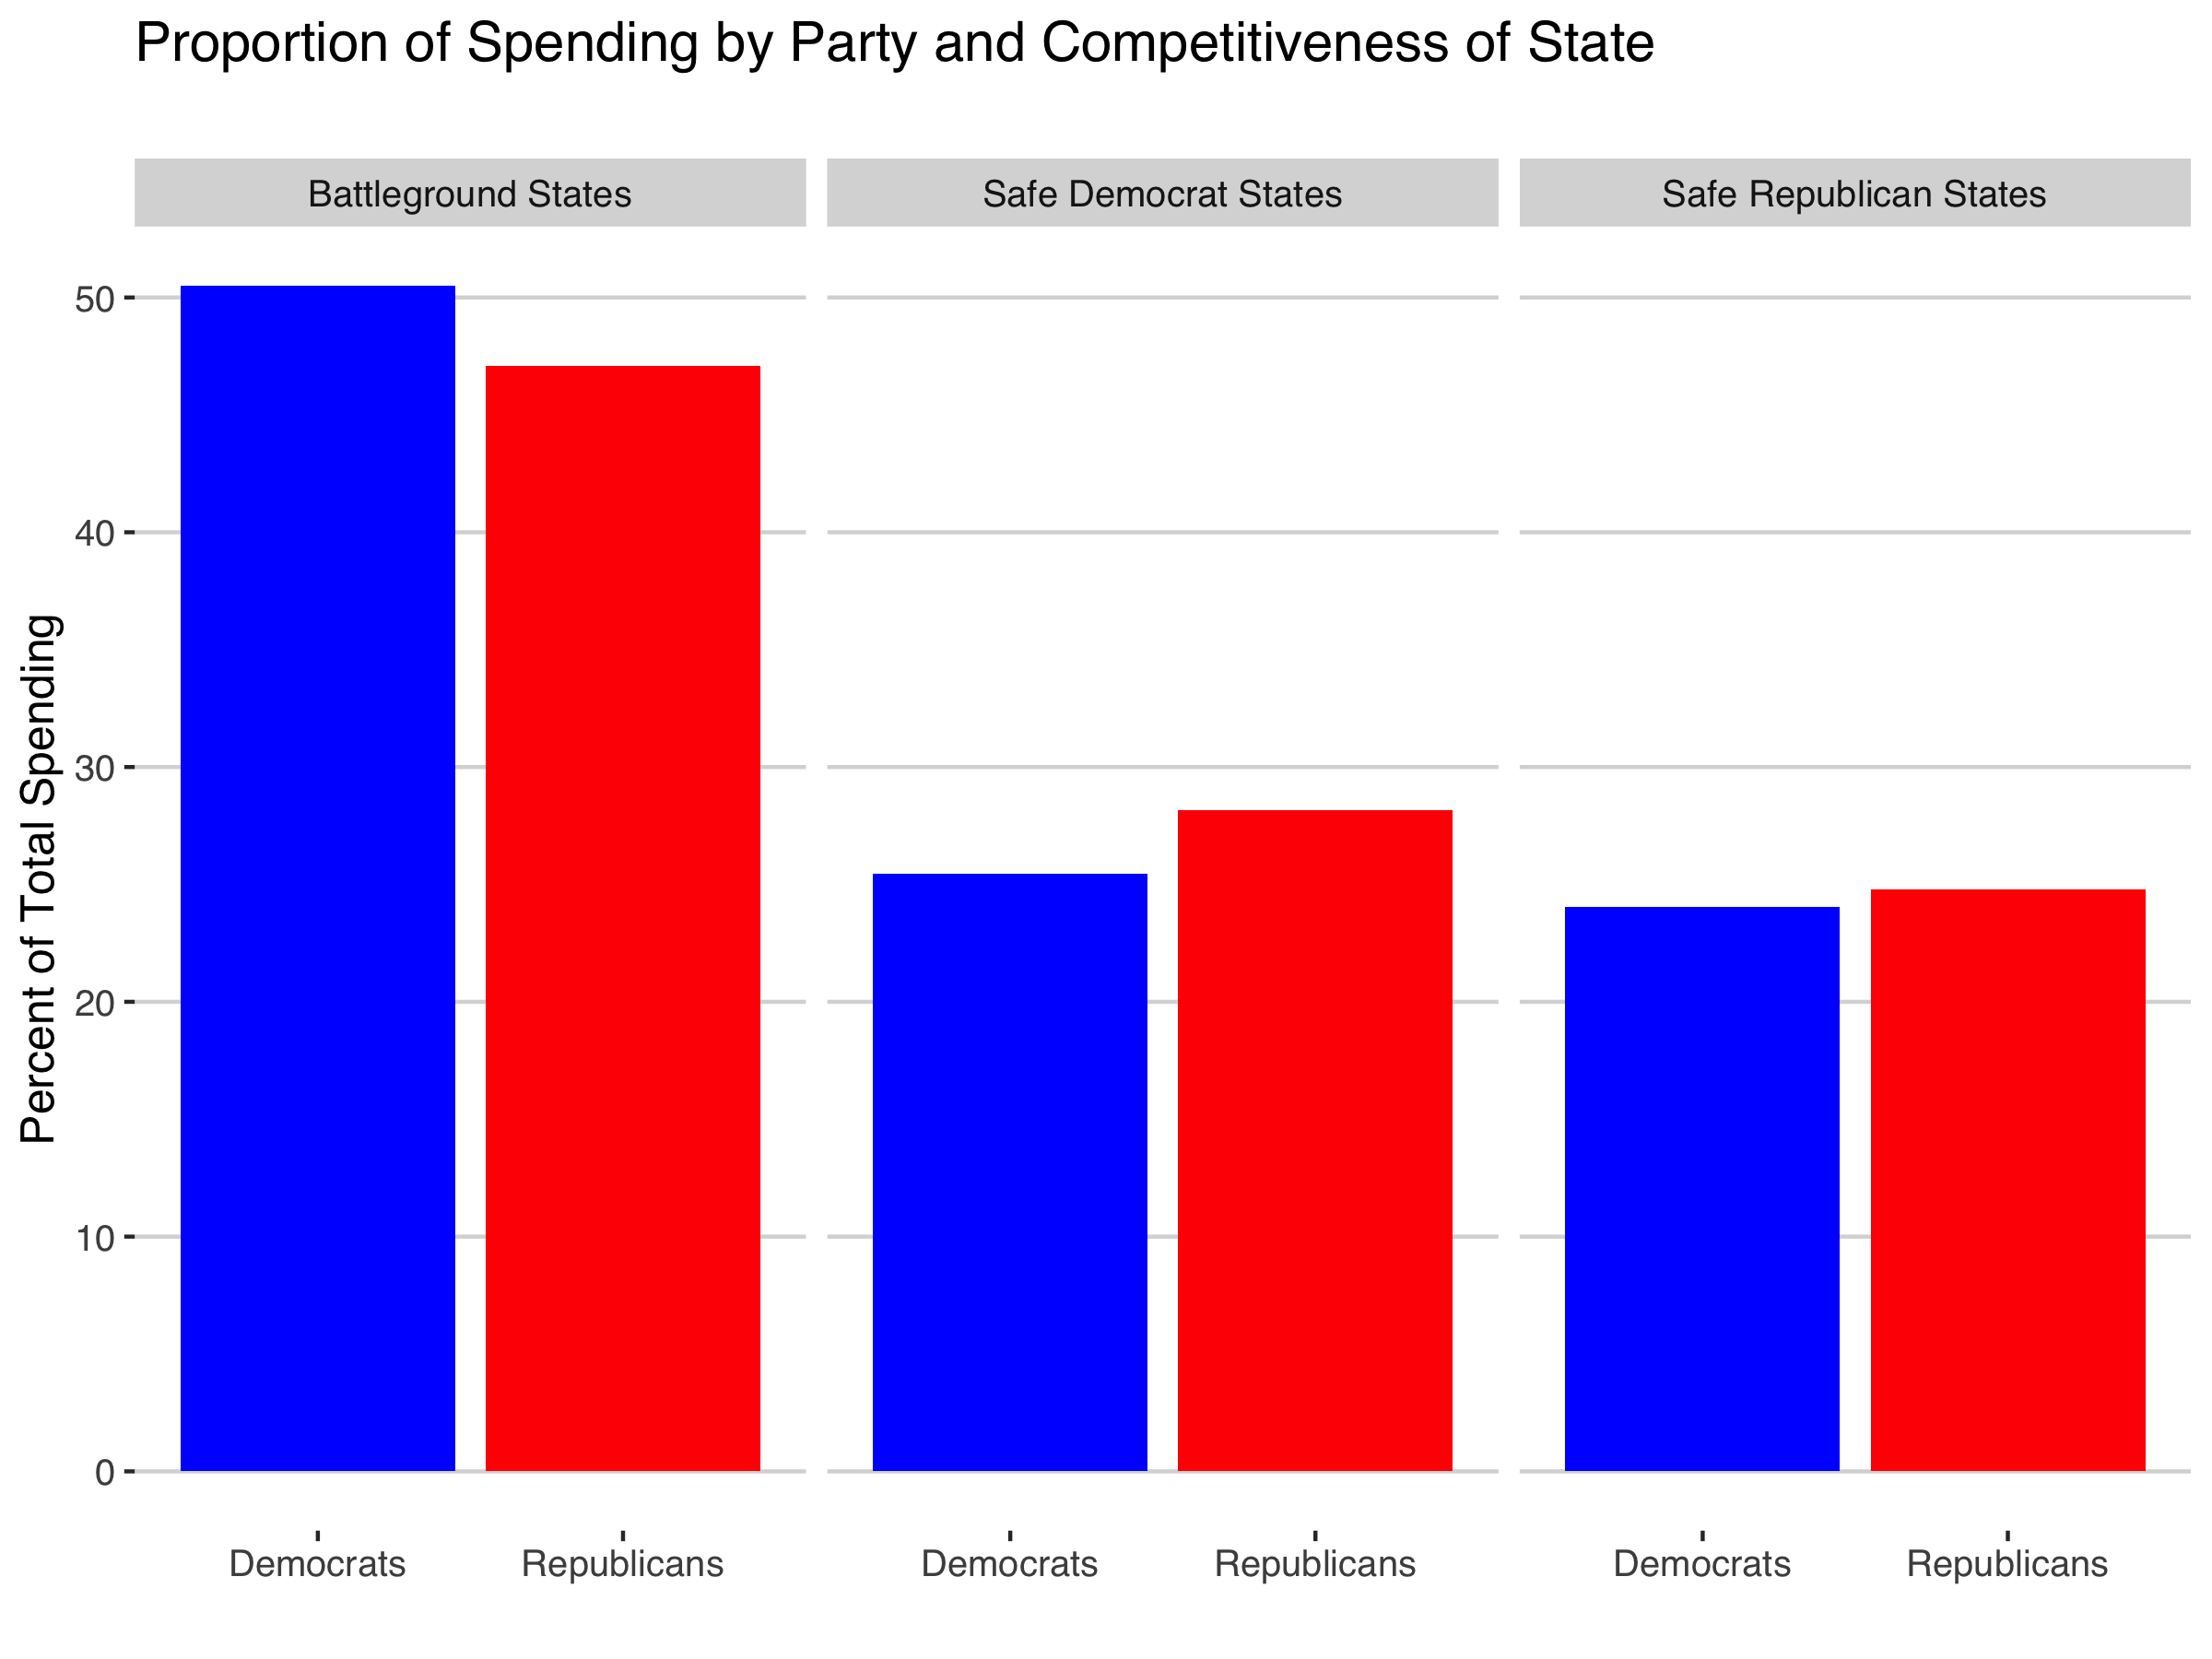 image of average proportional spending